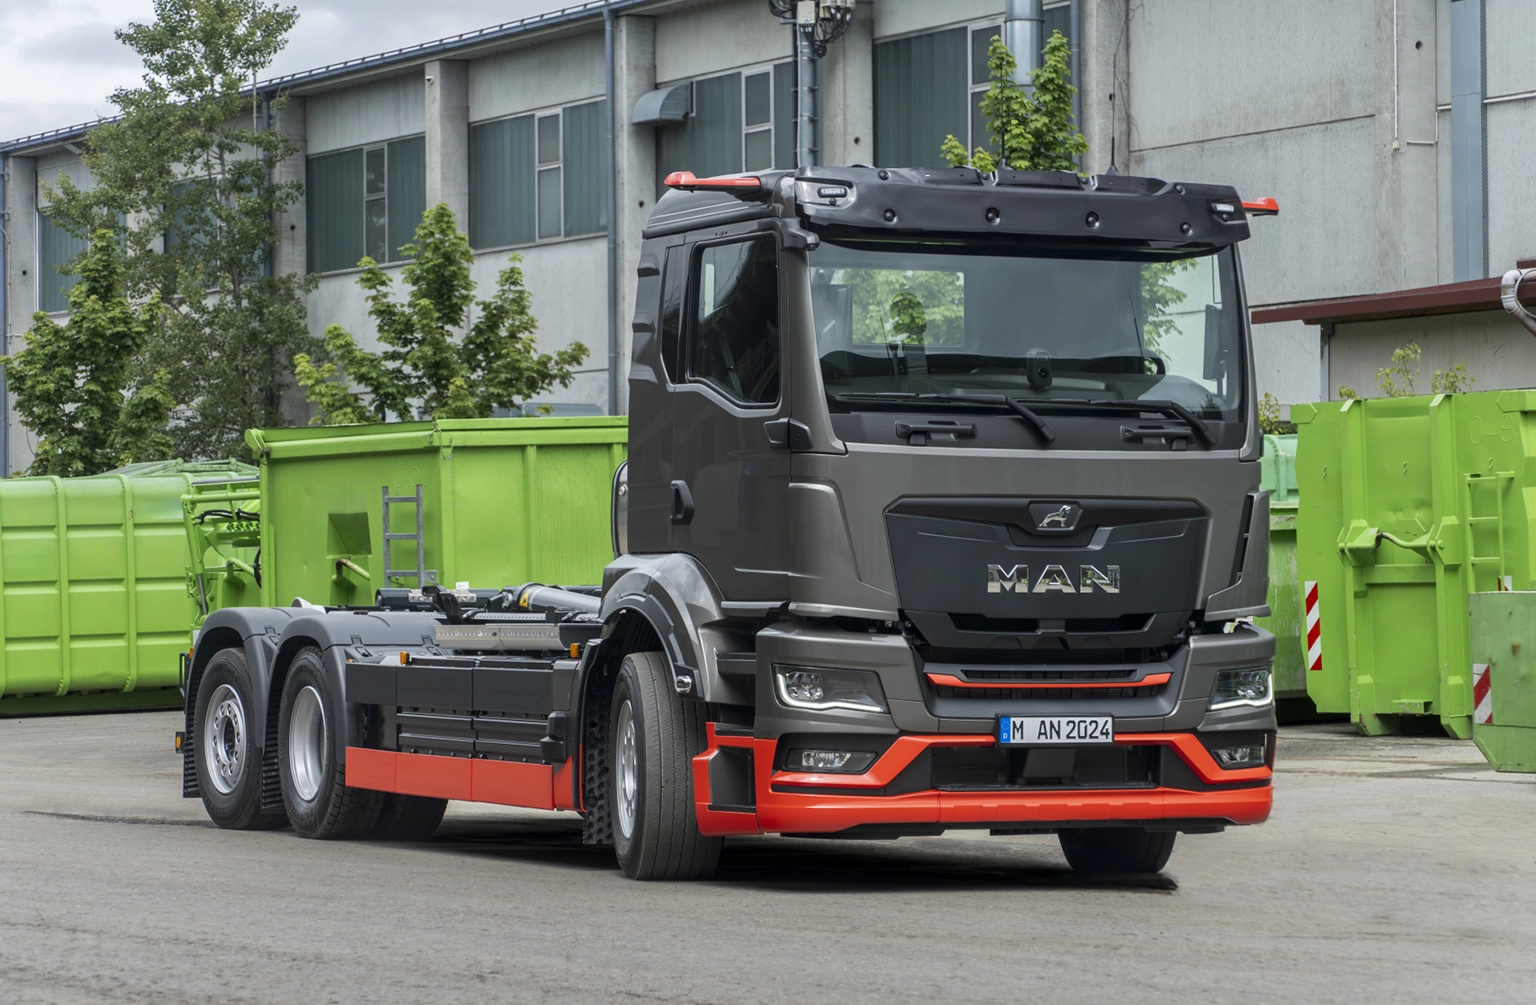 MAN eTruck Continues To Gain Momentum